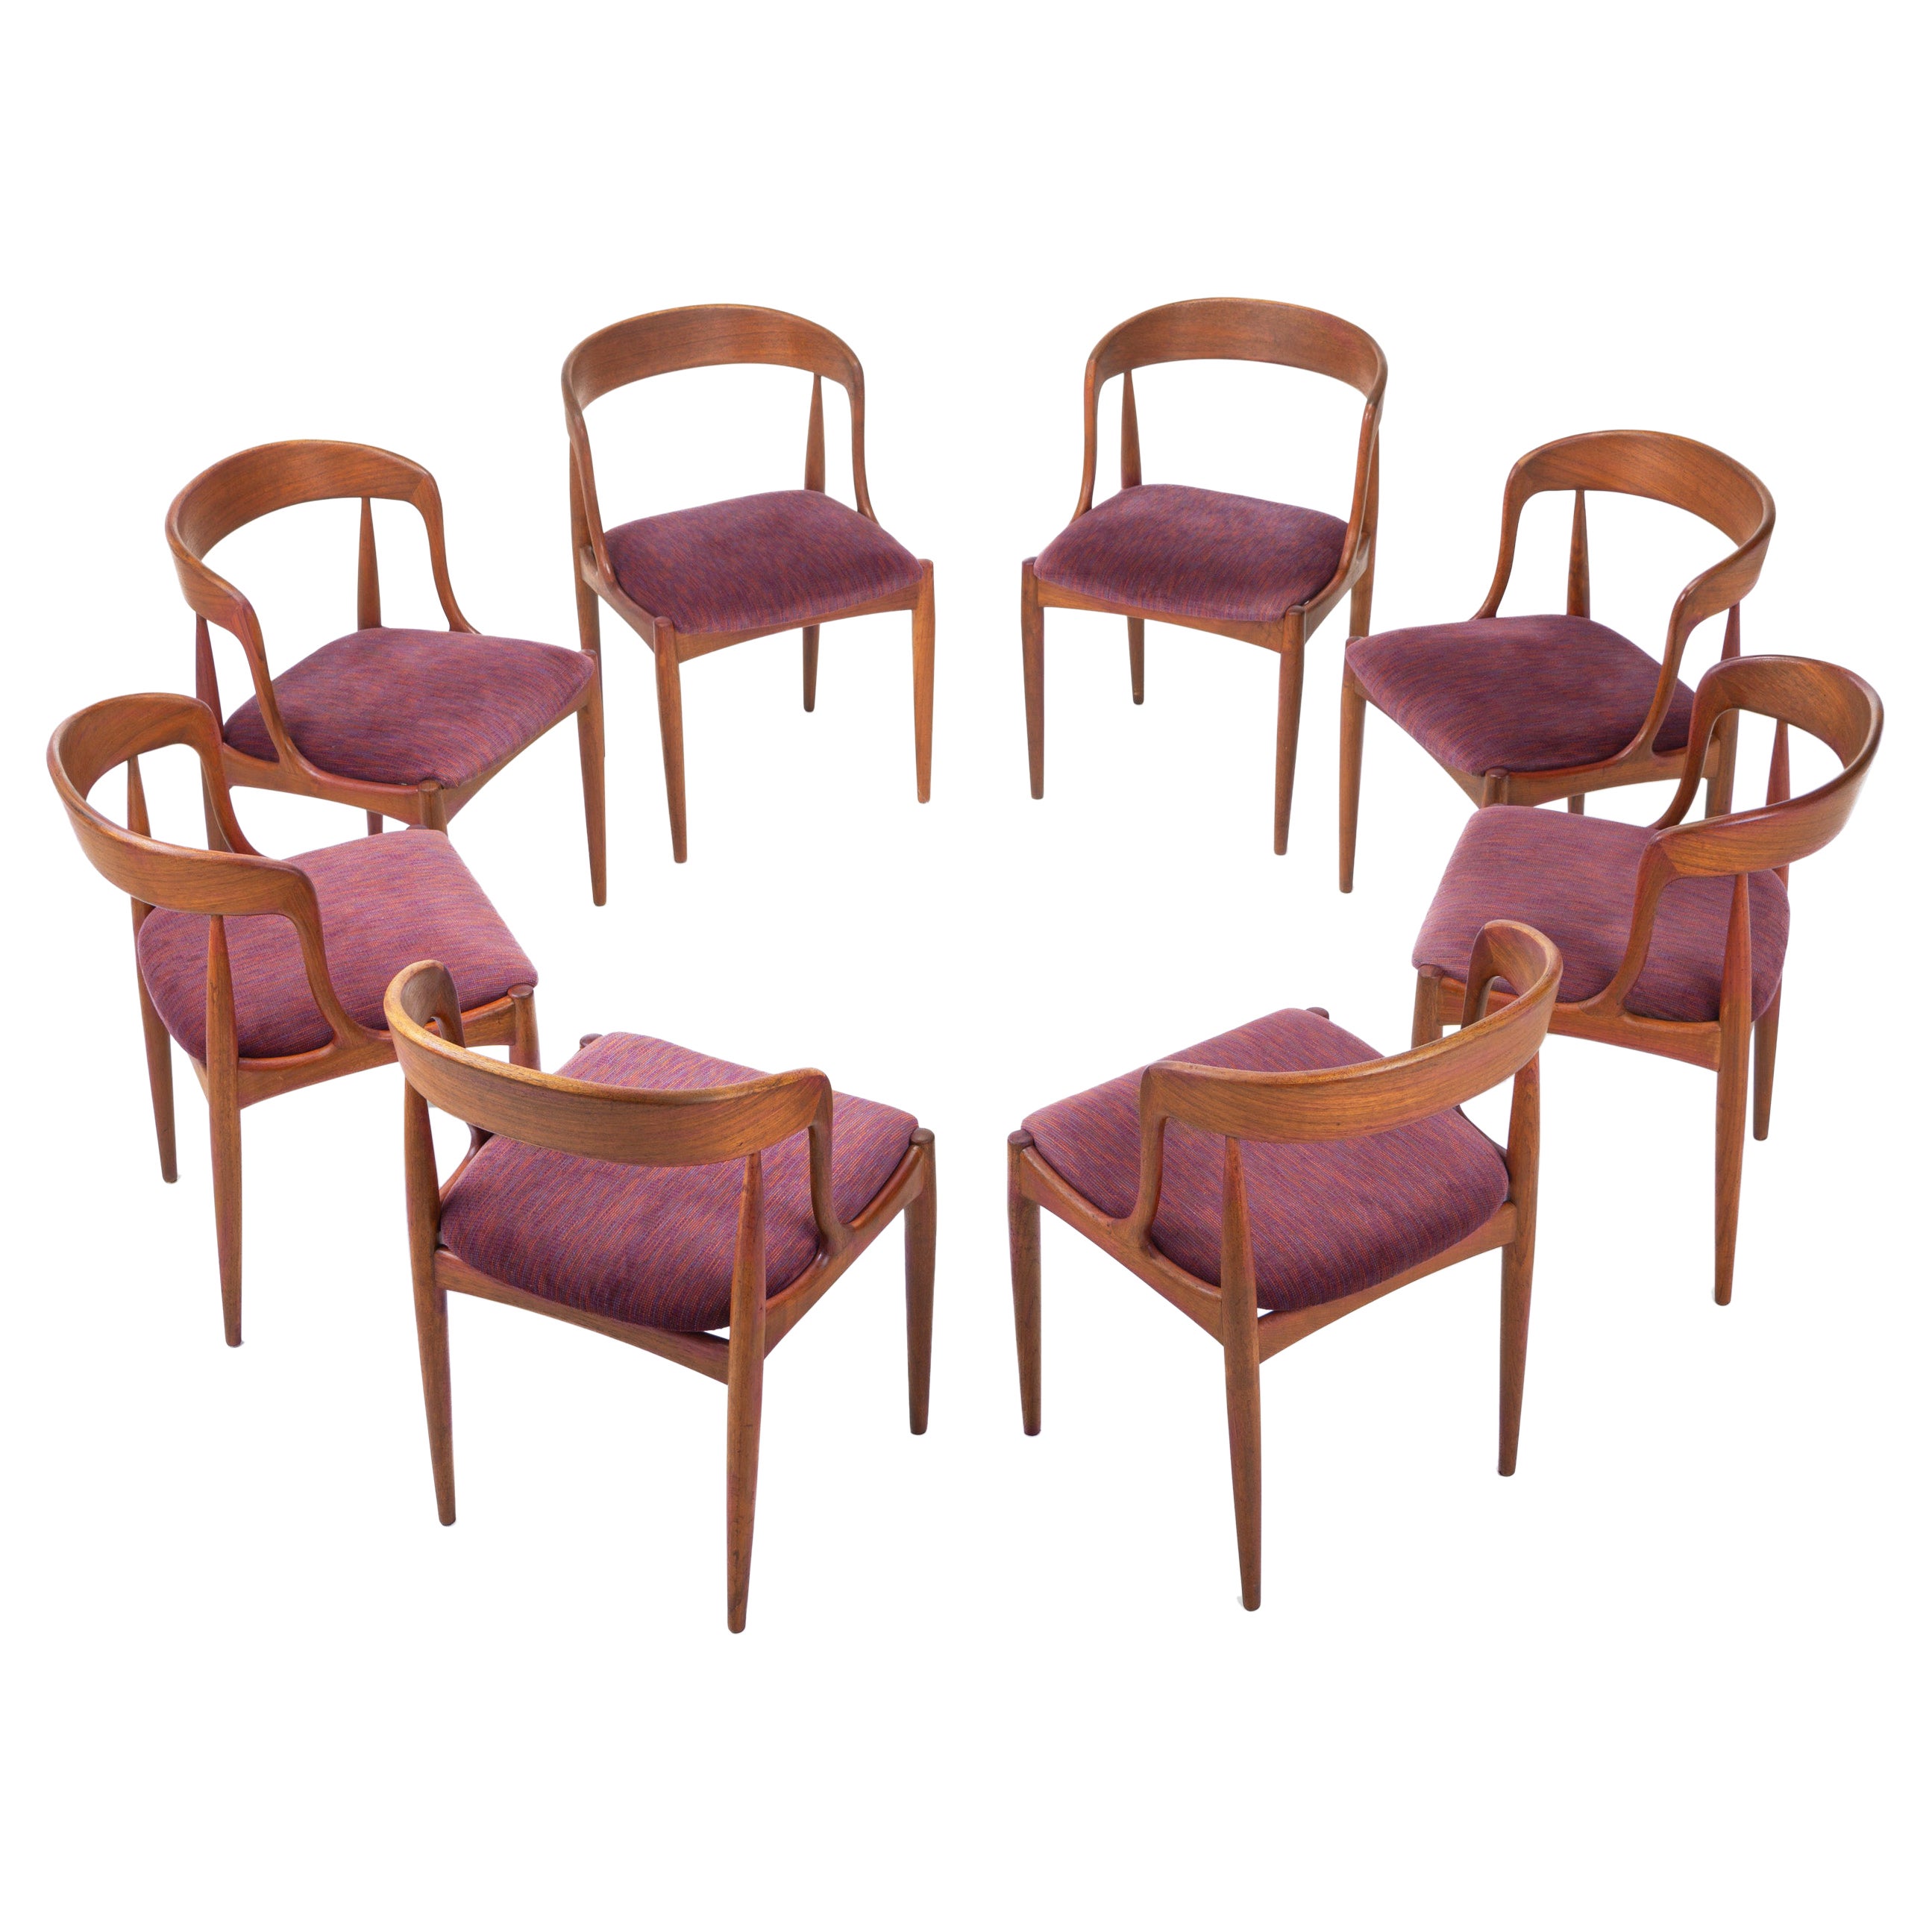 Set of 8 dining chairs by Johannes Andersen for Uldum, Denmark 1960s For Sale